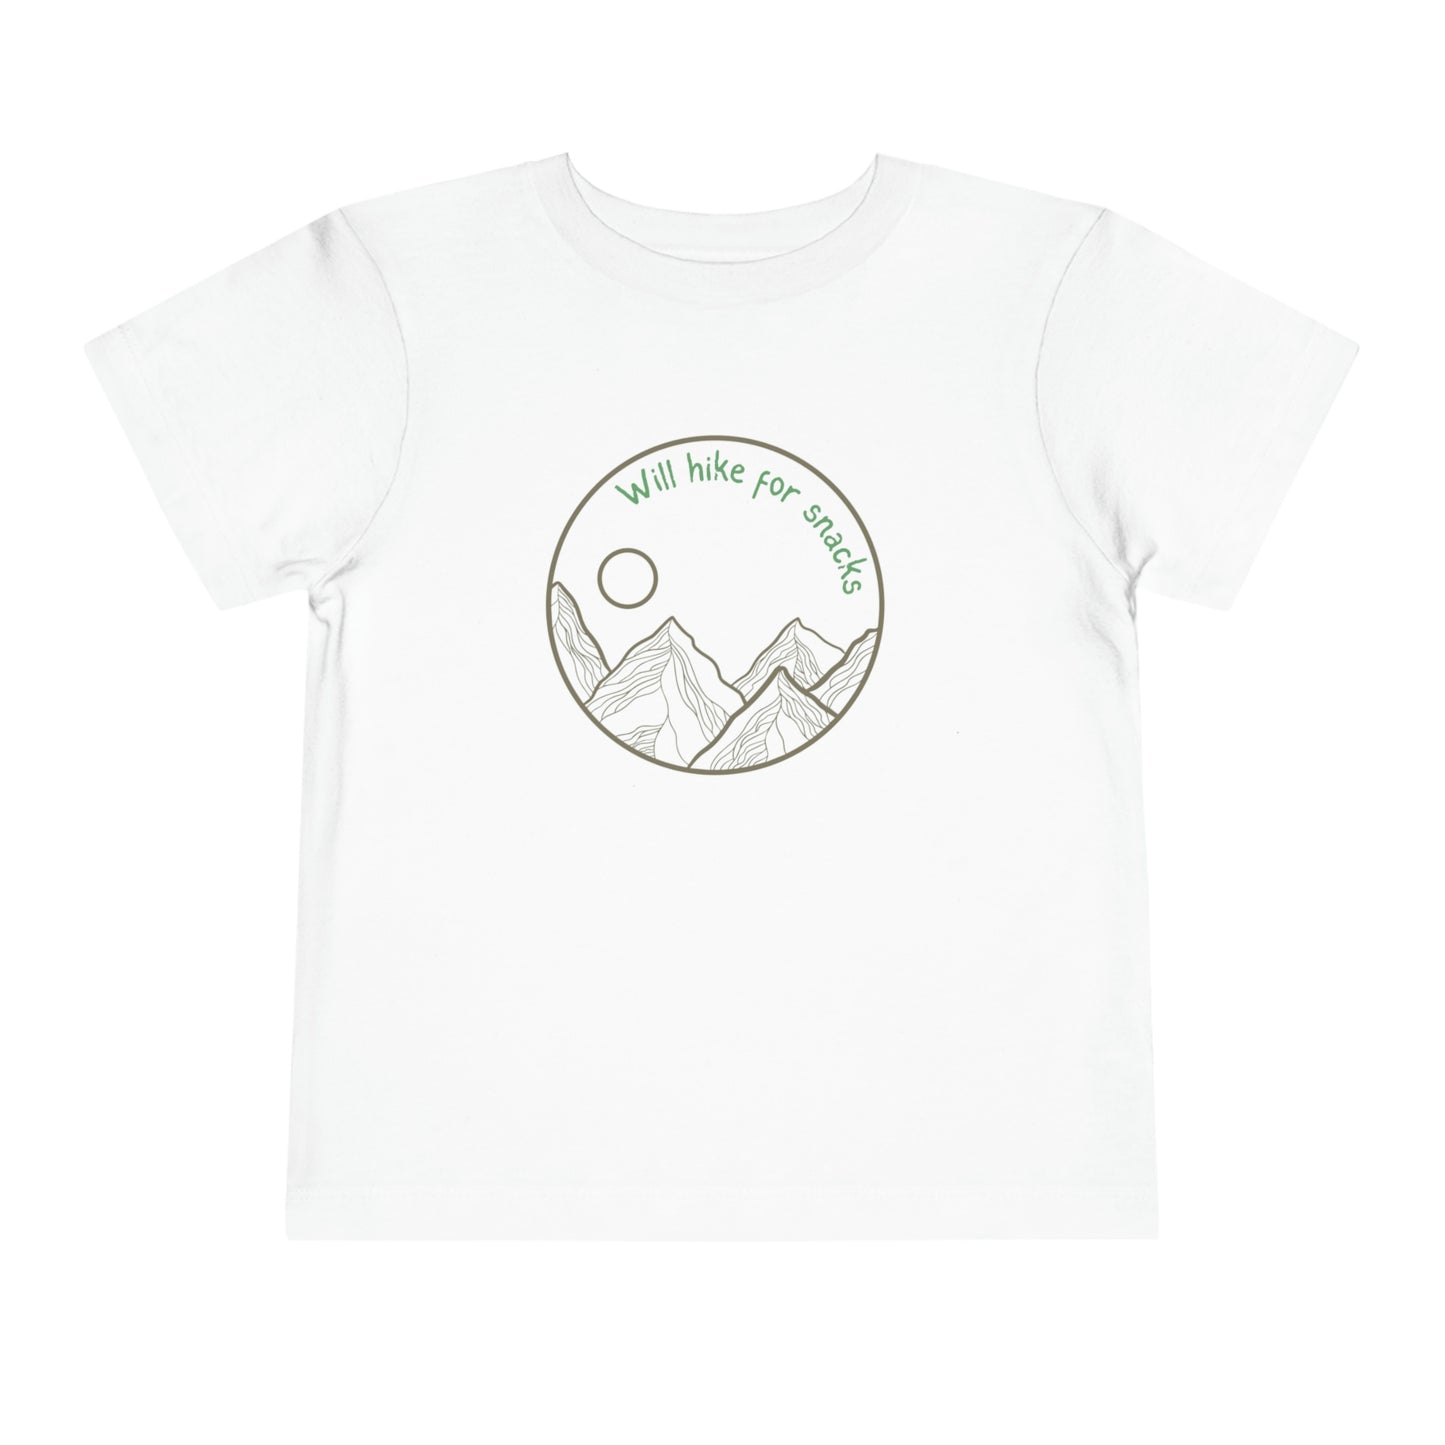 Will hike for snacks toddler's t-shirt